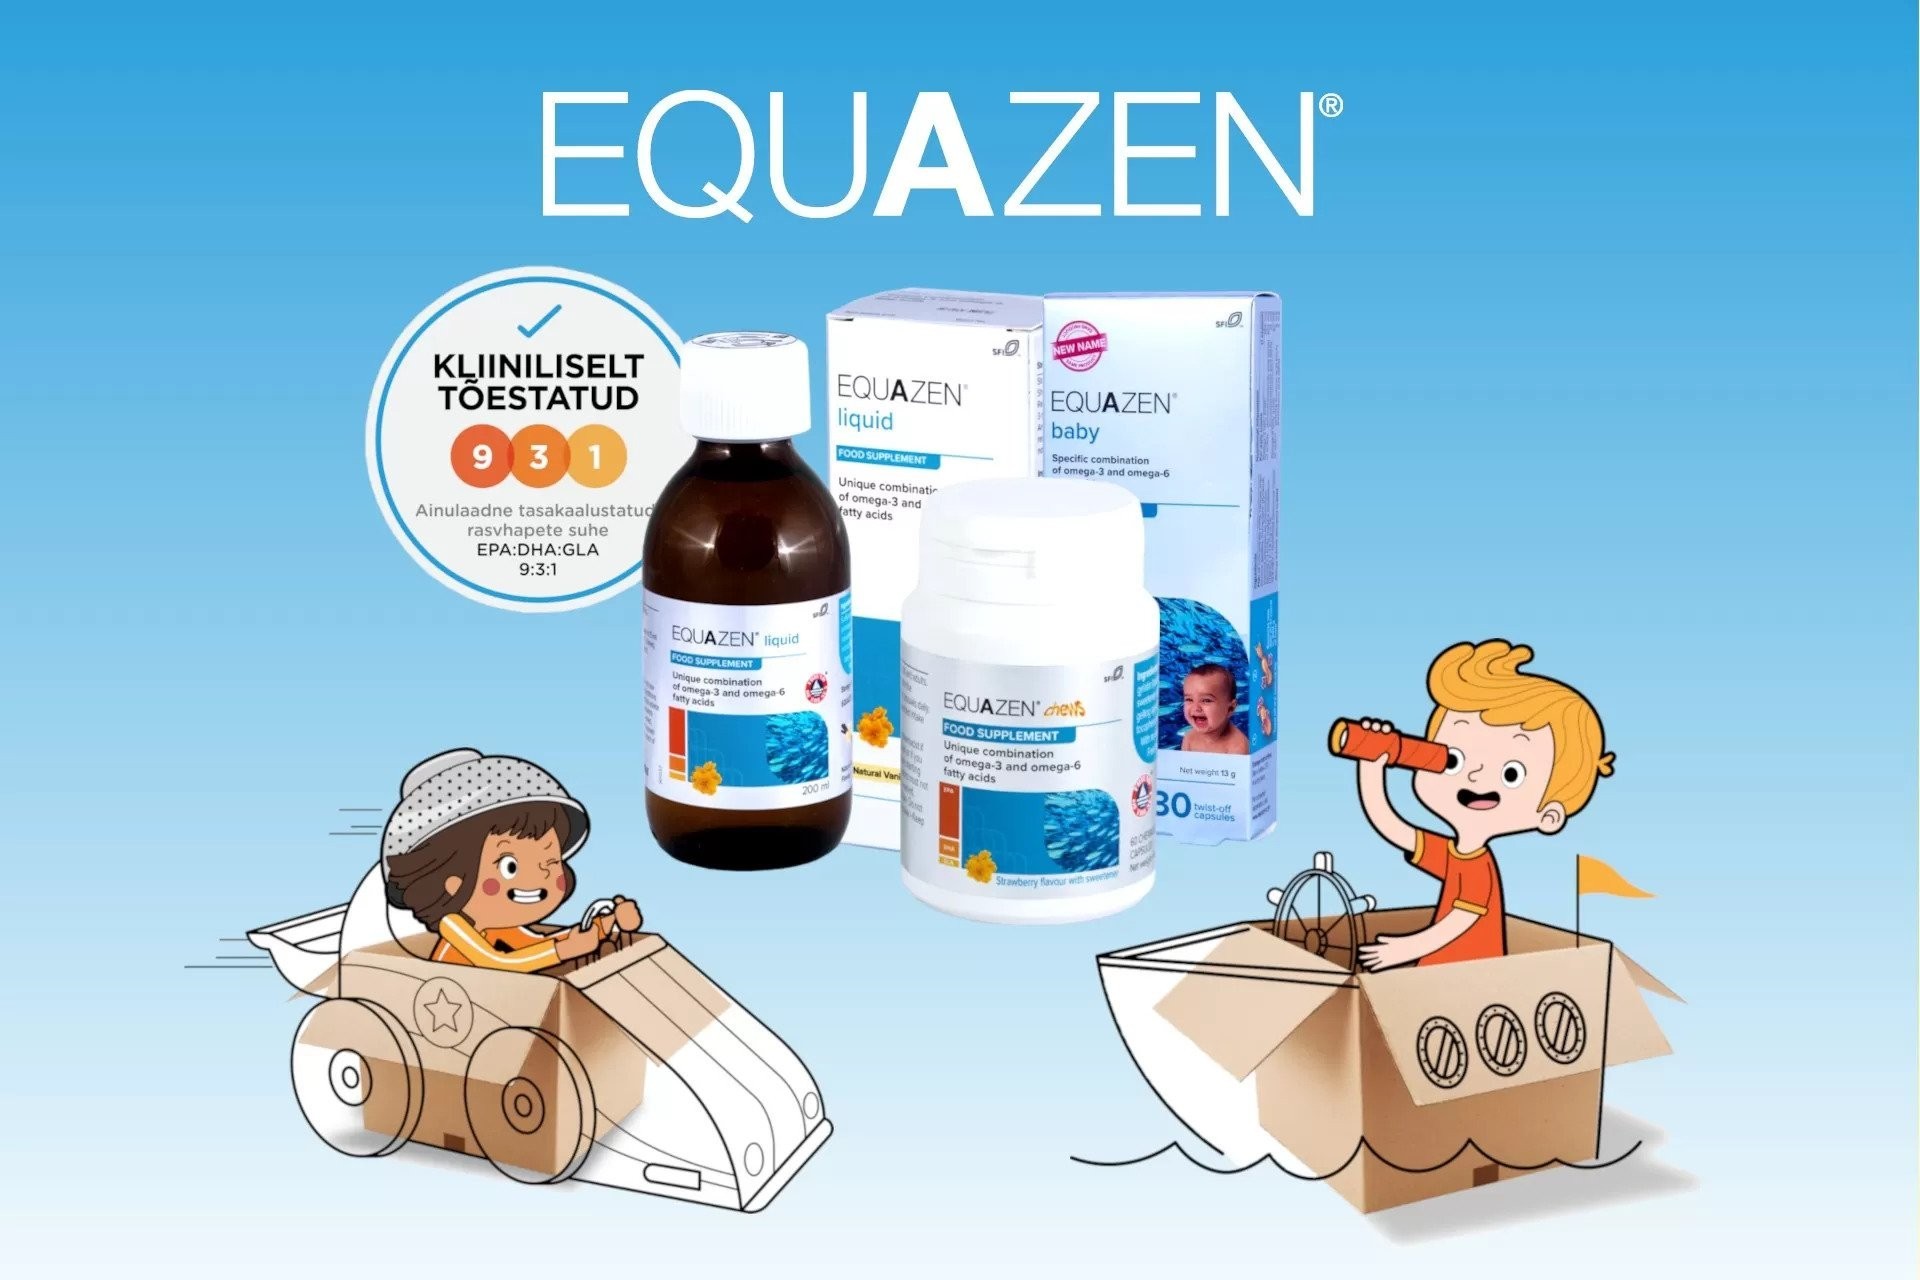 Smarty Pharmacy offers high quality Equazen fish oil for the whole family